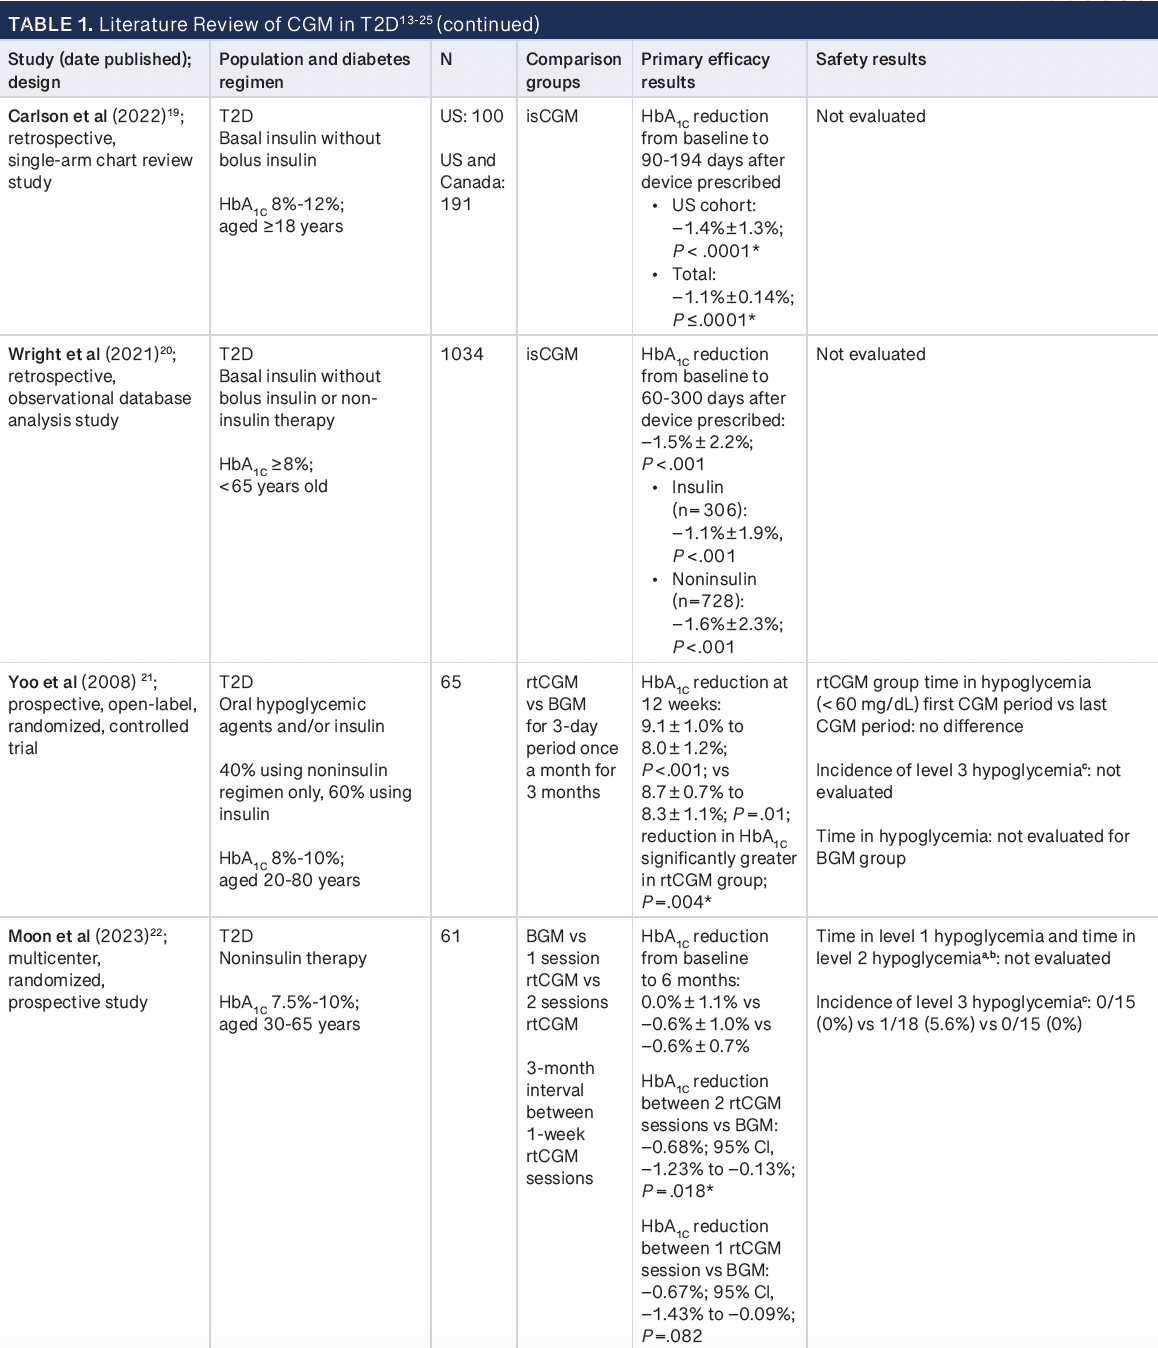 Table 1: Literature Review of CGM in T2D -- BGM, blood glucose monitoring; CGM, continuous glucose monitor; DSME, diabetes self-management education; HbA1C, hemoglobin A1C; isCGM, intermittently scanned CGM; rtCGM, real-time CGM; T1D, type 1 diabetes; T2D, type 2 diabetes ; TIR, time in range.  aLevel 1 hypoglycemia: blood glucose concentration < 70 mg/dL (3.9 mmol/L) but ≥ 54 mg/dL (3.0 mmol/L).  bLevel 2 hypoglycemia: blood glucose concentration < 54 mg/dL (3.0 mmol/L).  cLevel 3 hypoglycemia: severe hypoglycemia event requiring assistance from another person.  *Significant difference.